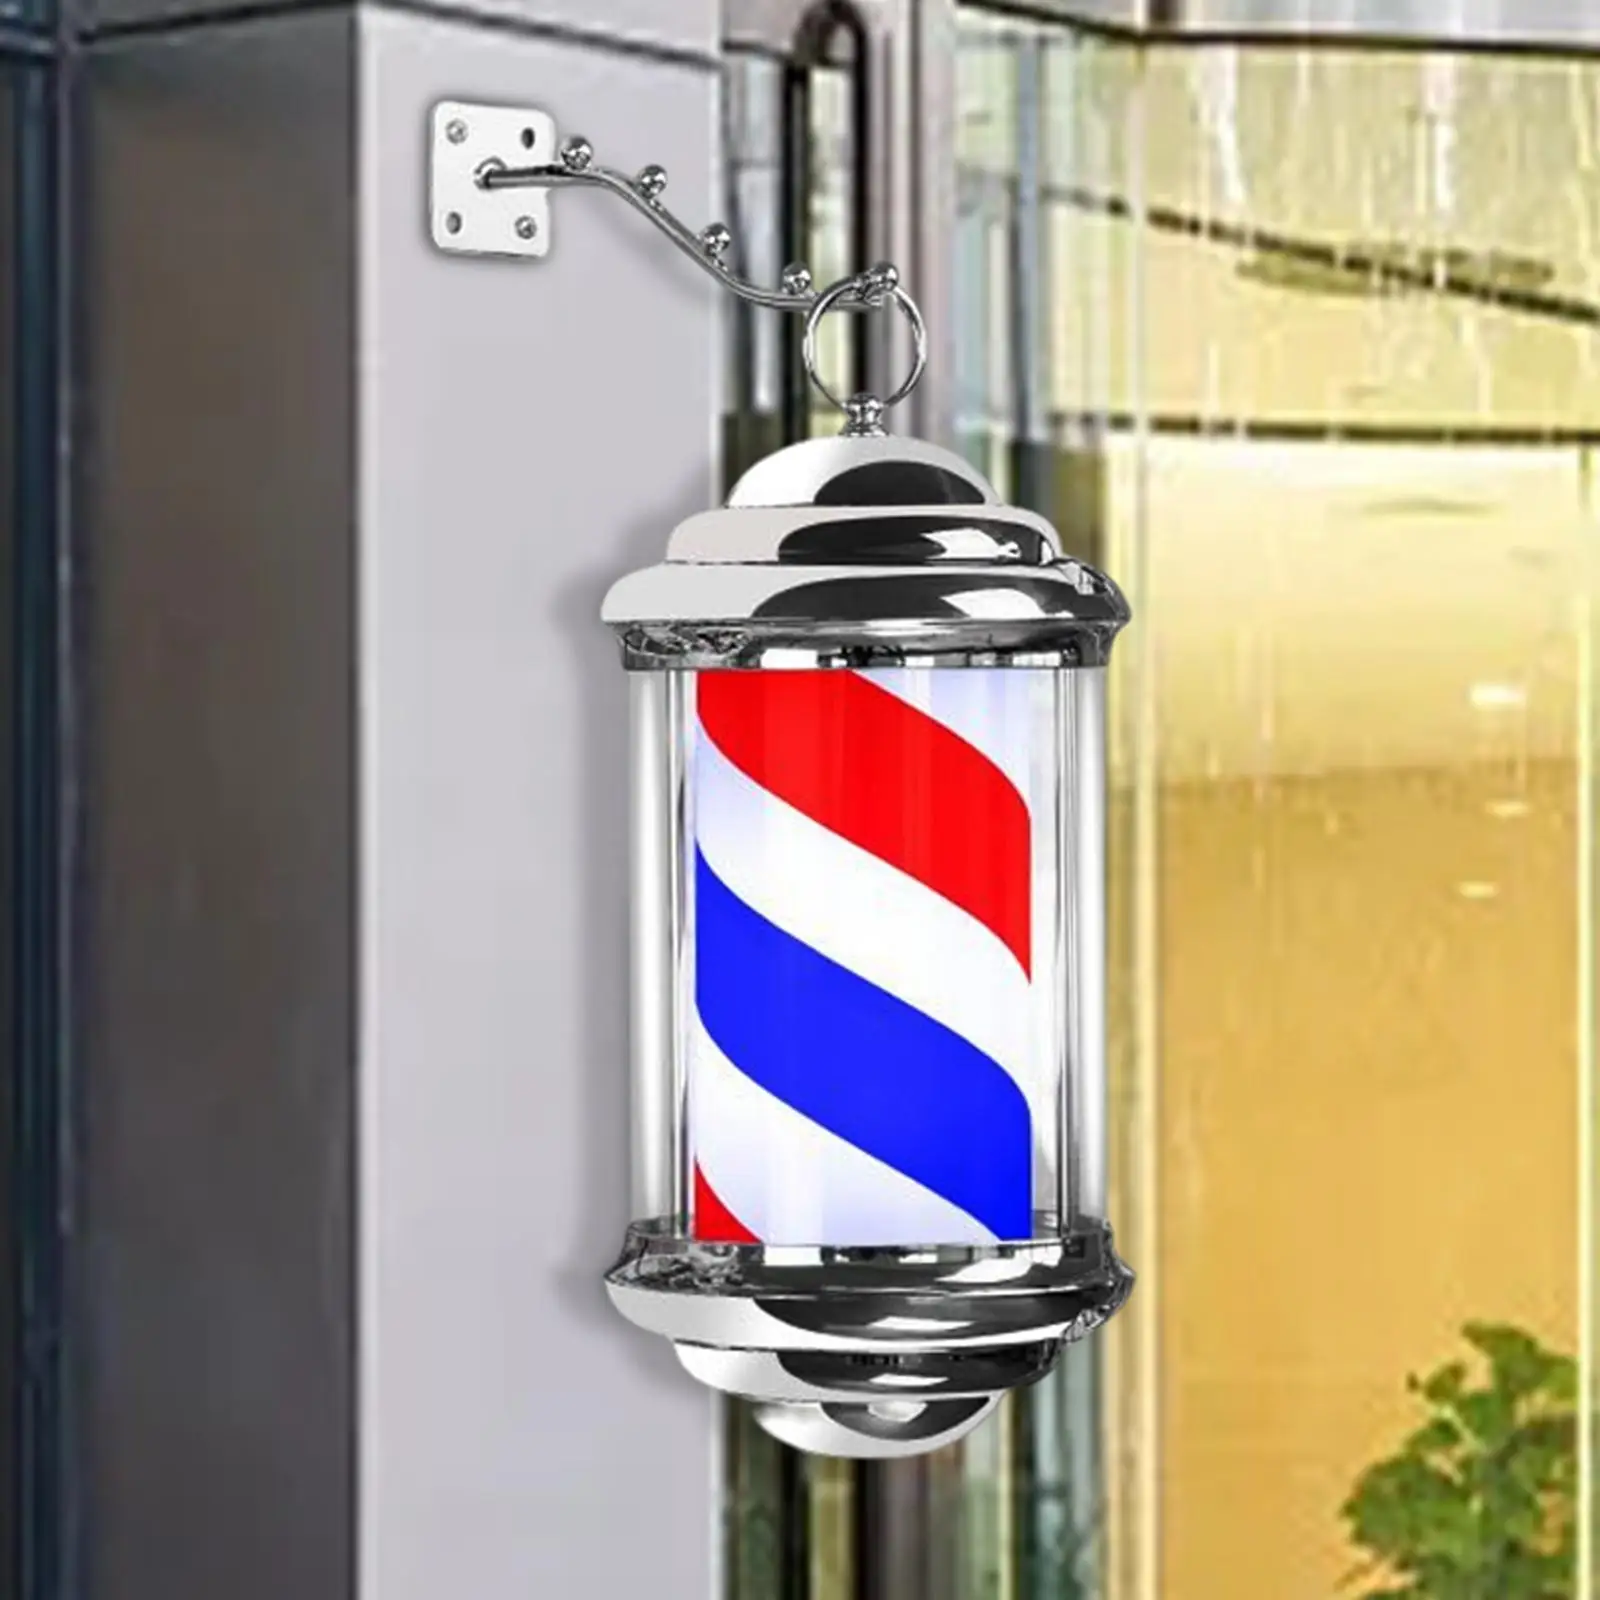 Rainproof Barber Pole LED Light Rotating Hair Salon Sign Light Save Energy W/ Hanging Bracket Barber Pole Stand Lamp for Party